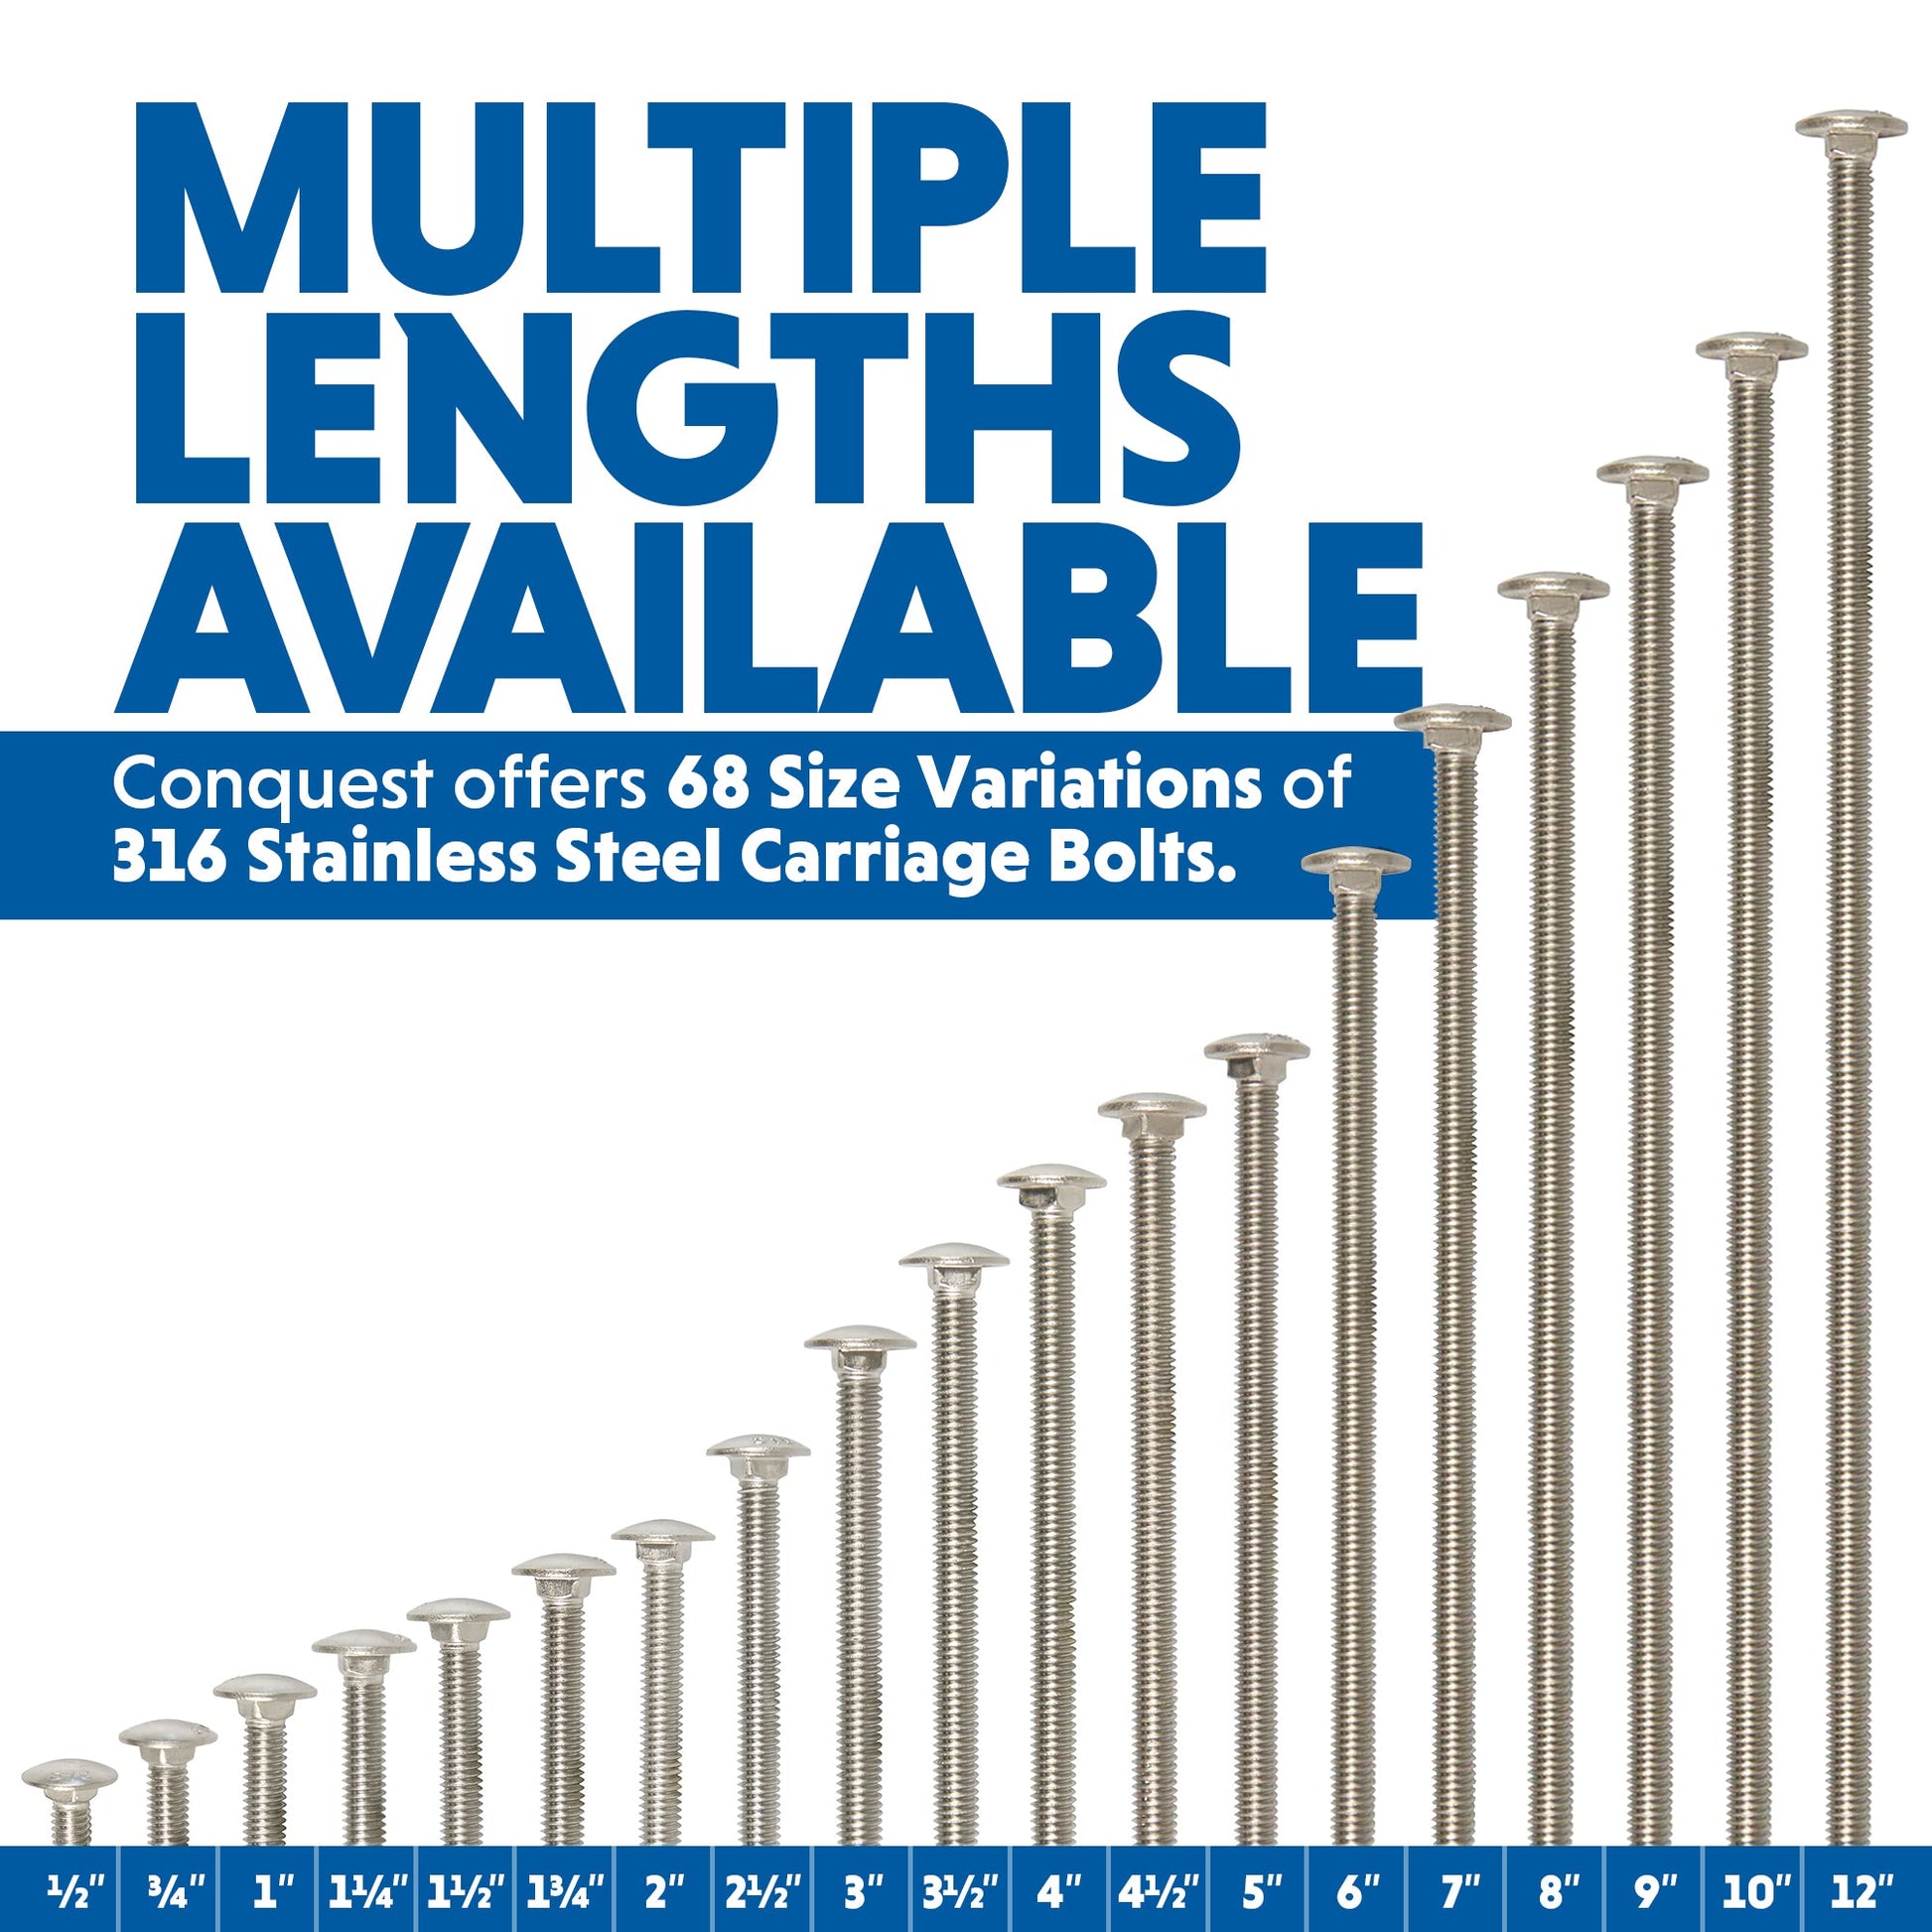 Conquest 316 Stainless Steel Carriage Bolts are Available in a Wide Variety of Lengths, from 1/2" to 12"